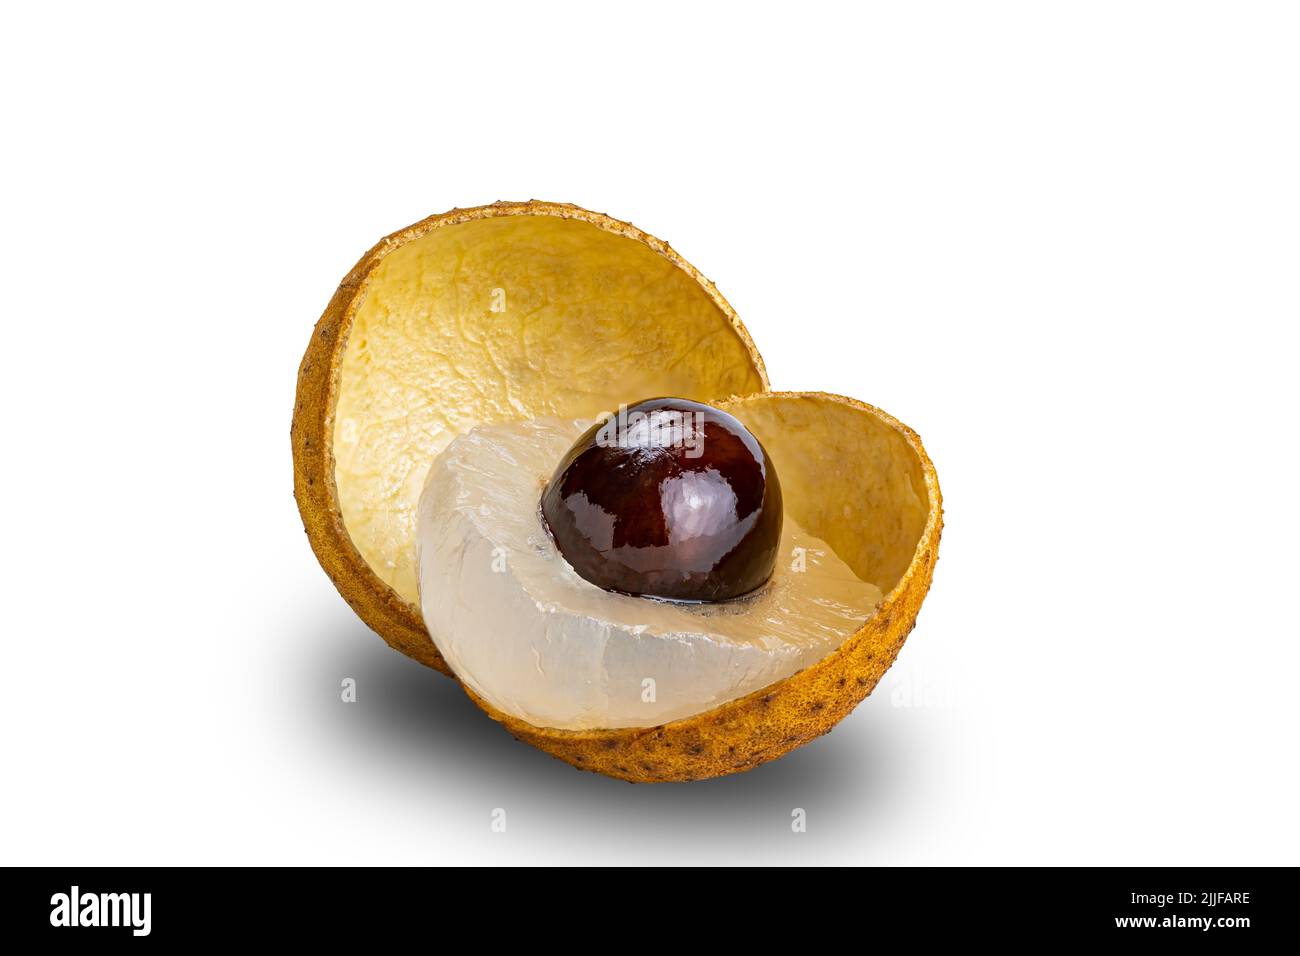 Peeled juicy fresh longan with translucent pulp, black seed and peel isolated on white background with clipping path. Stock Photo